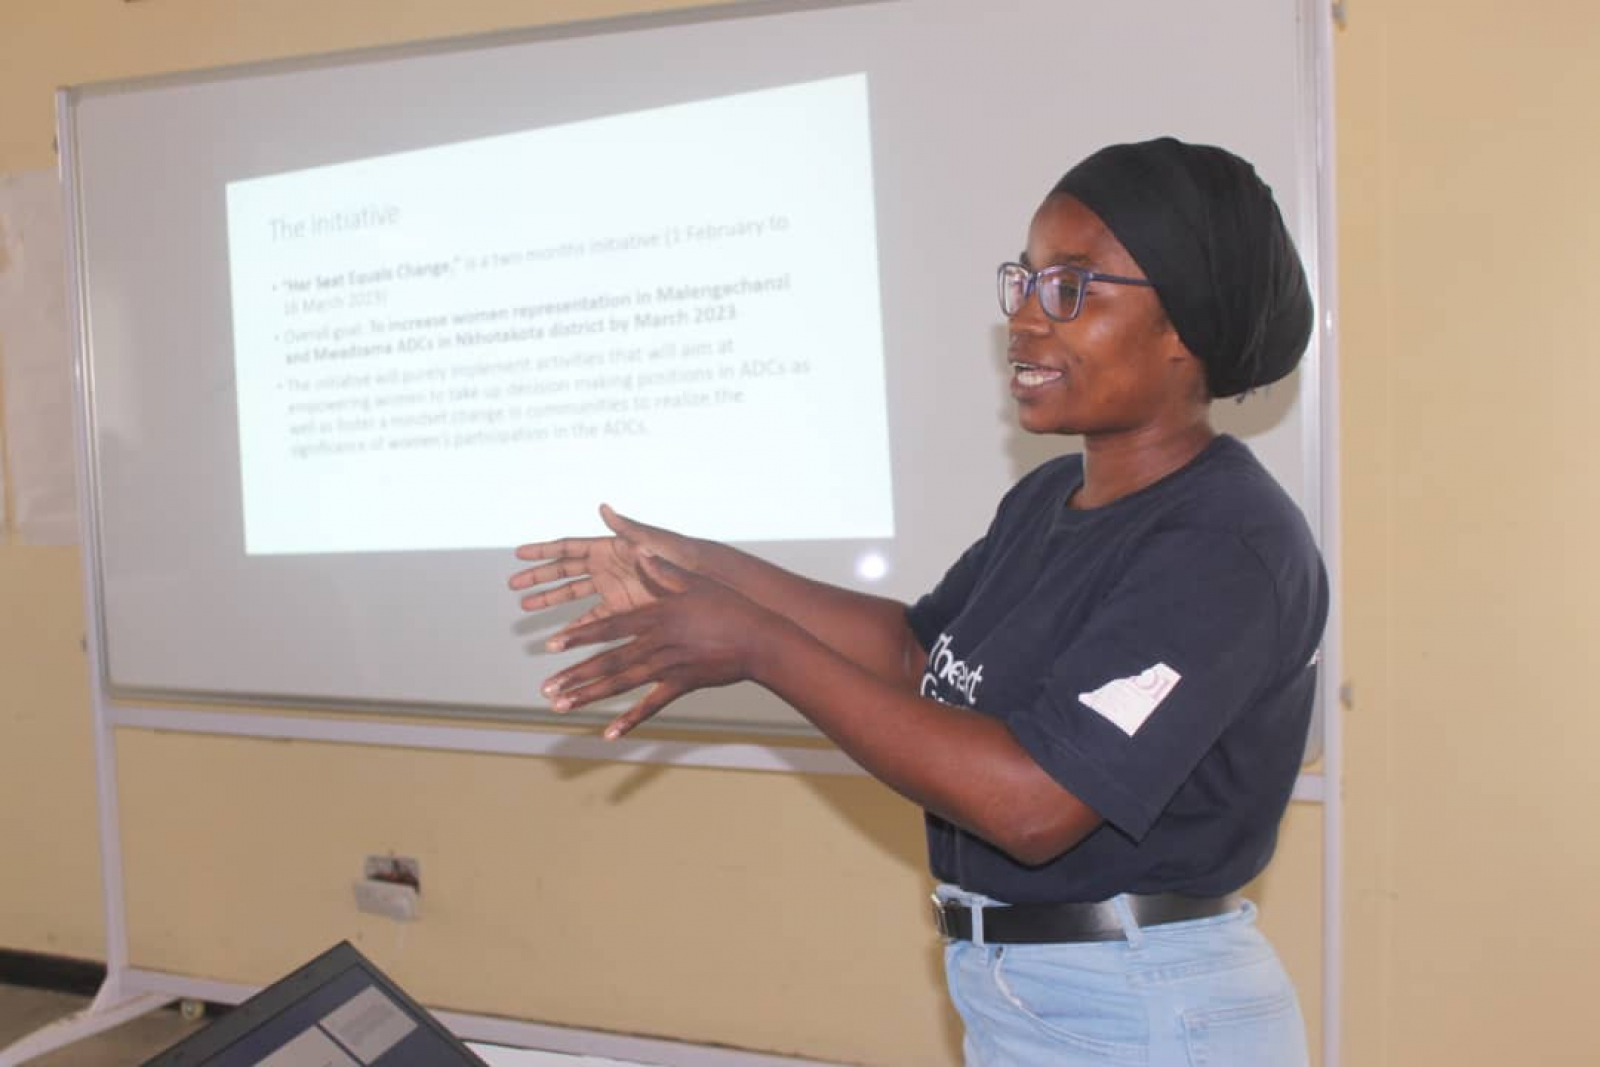 "I stood on my own feet” - Next Gen Fellow and Young Malawian Poised to Lead